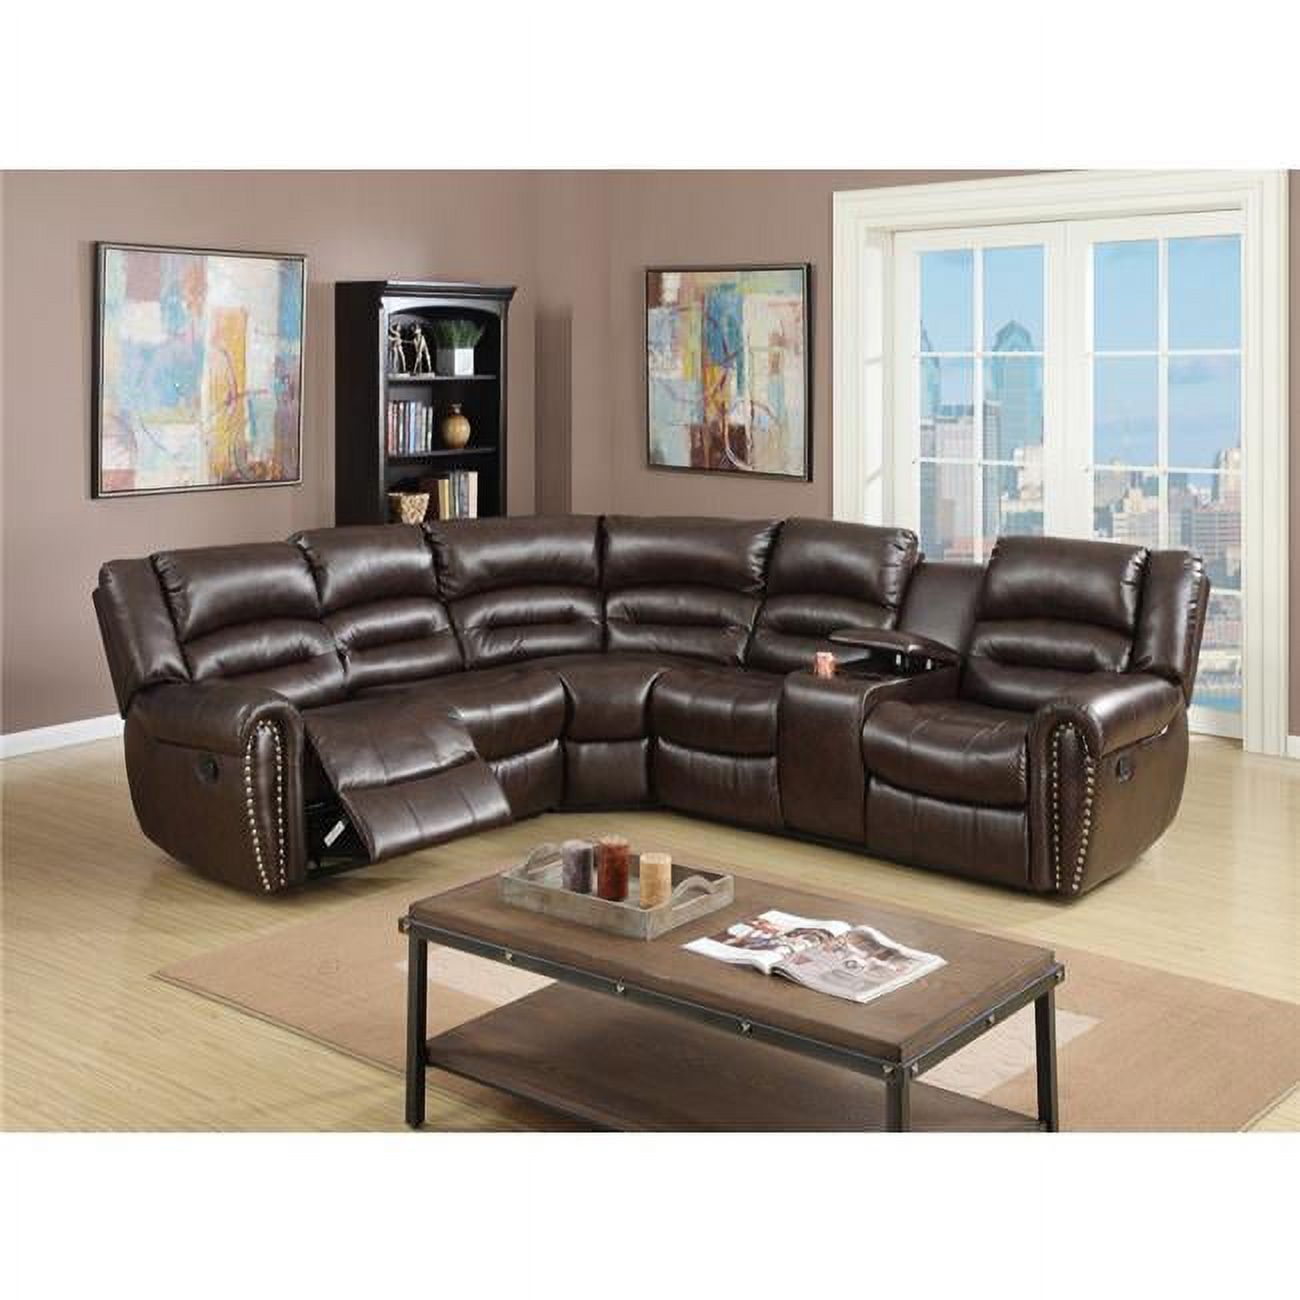 Benjara 3-Piece Modern Bonded Leather Reclining Sectional in Brown - image 1 of 2